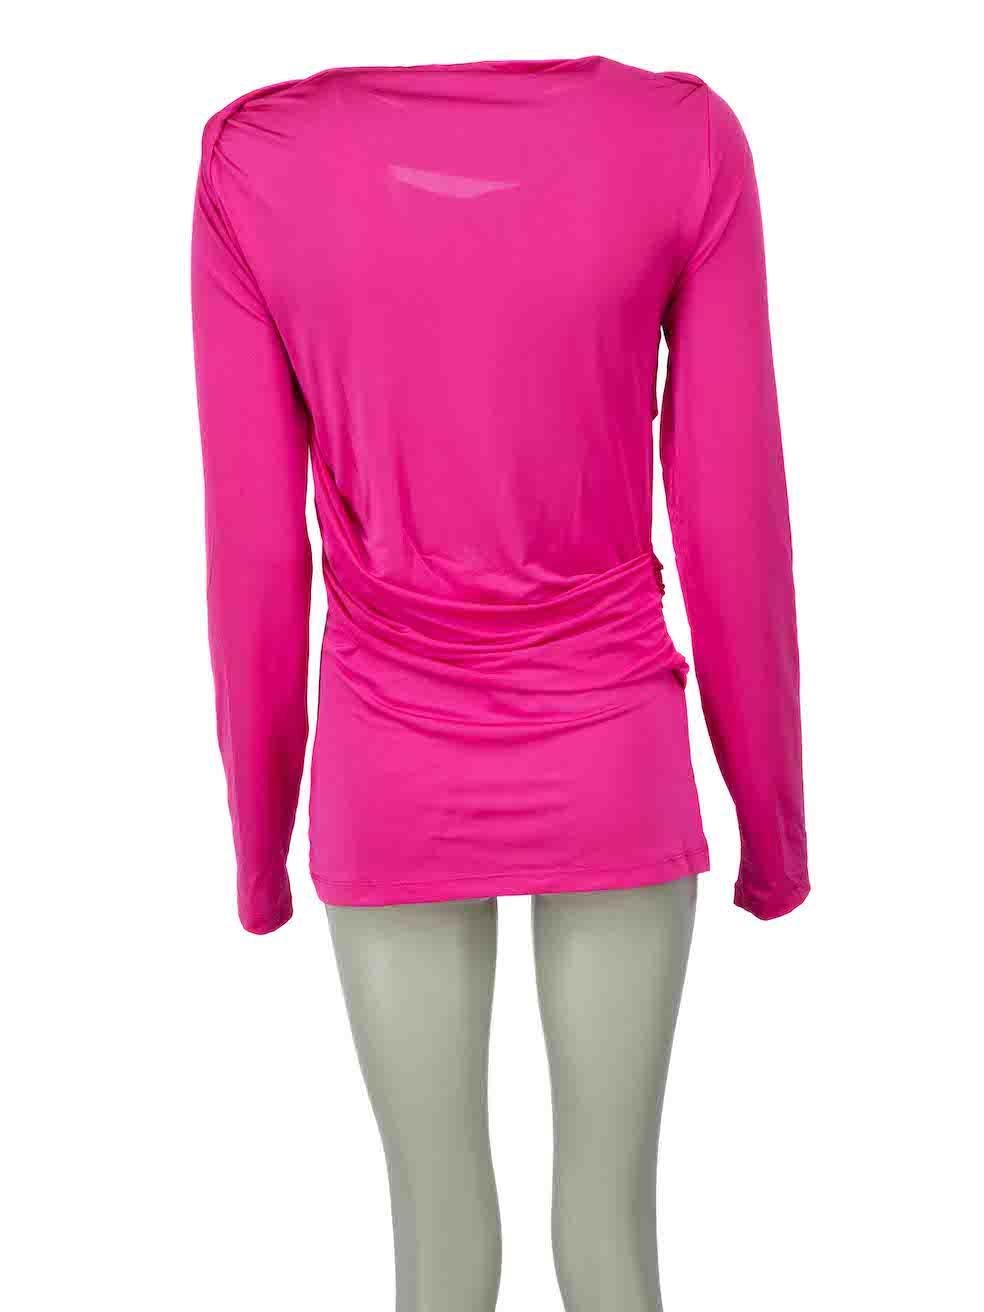 Victoria Beckham Pink Ruched Long Sleeve Top Size M In Excellent Condition For Sale In London, GB